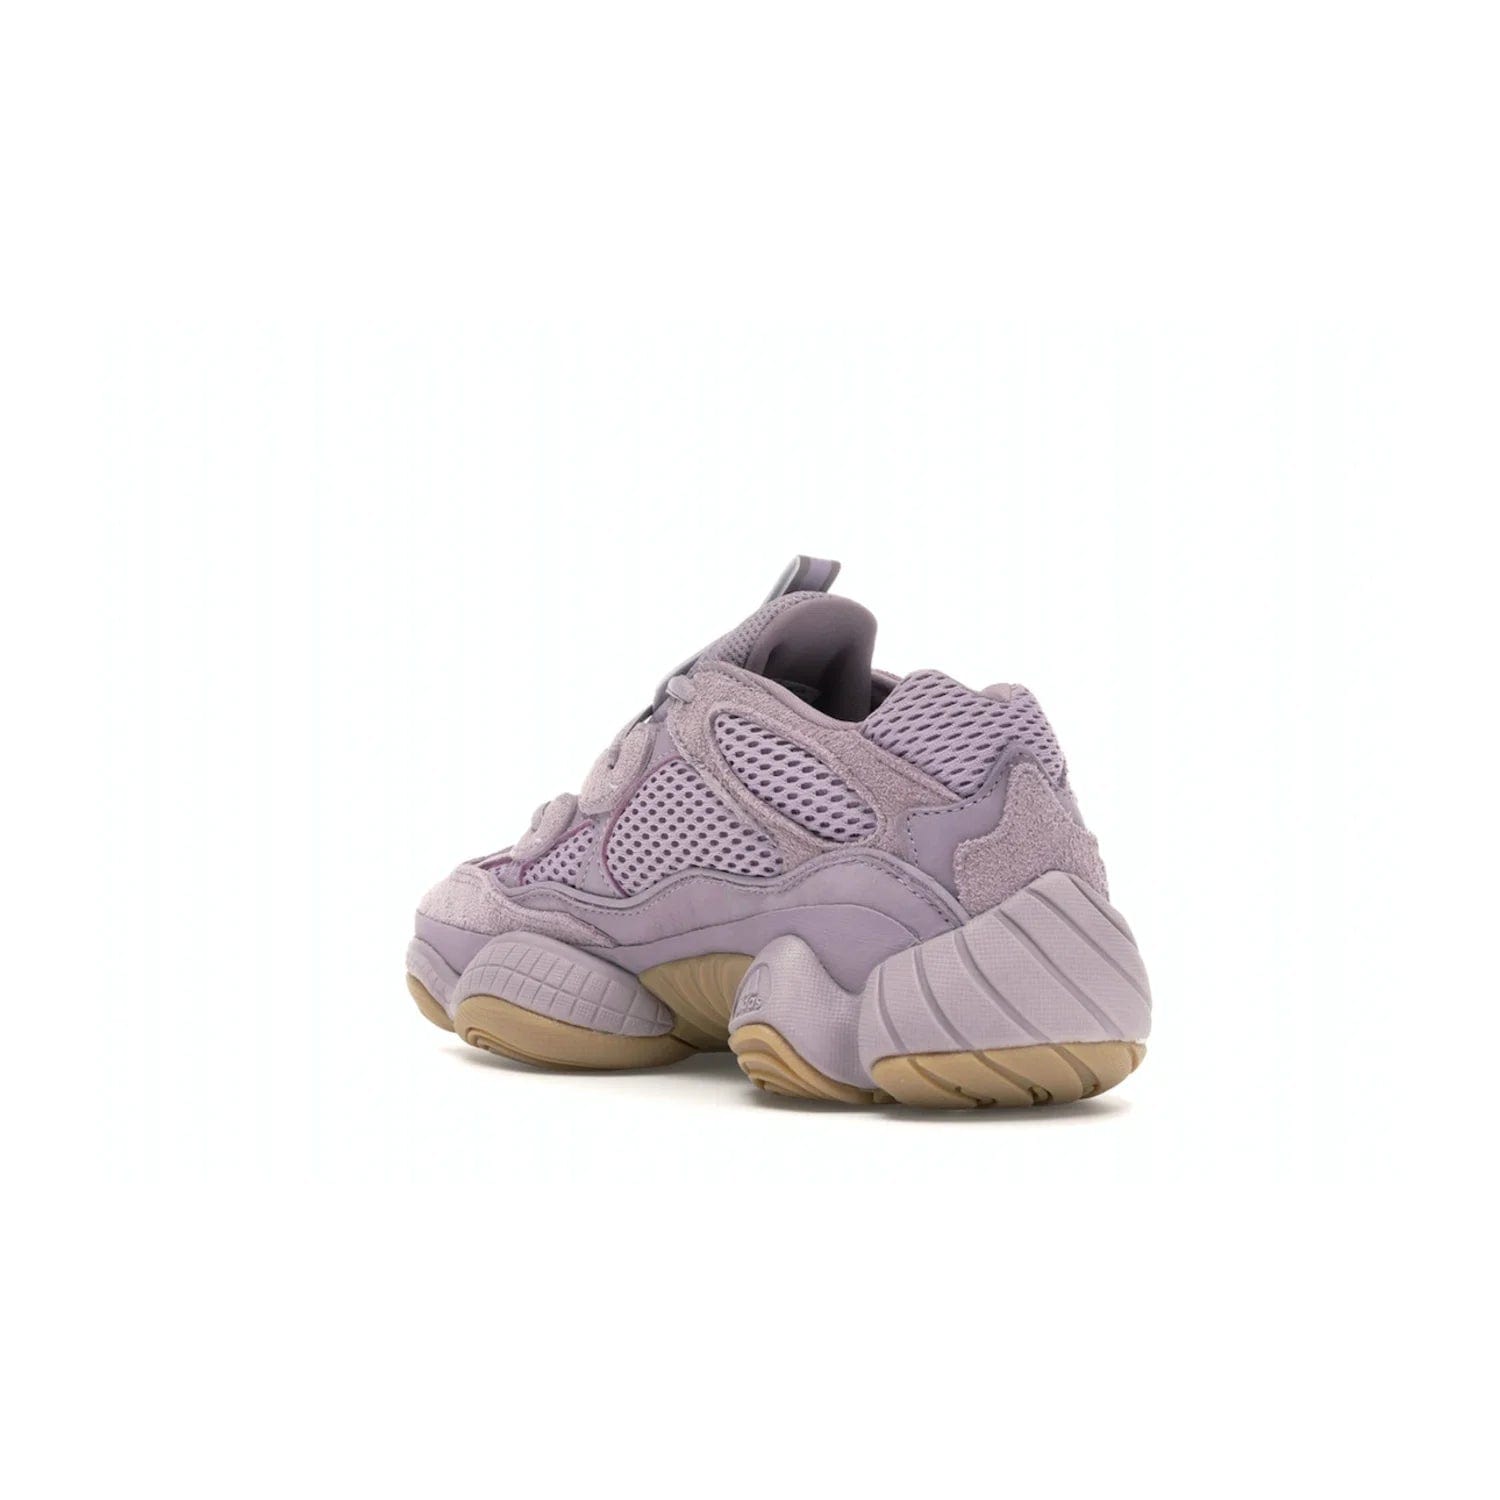 adidas Yeezy 500 Soft Vision - Image 24 - Only at www.BallersClubKickz.com - New adidas Yeezy 500 Soft Vision sneaker featuring a combination of mesh, leather, and suede in a classic Soft Vision colorway. Gum rubber outsole ensures durability and traction. An everyday sneaker that stands out from the crowd.